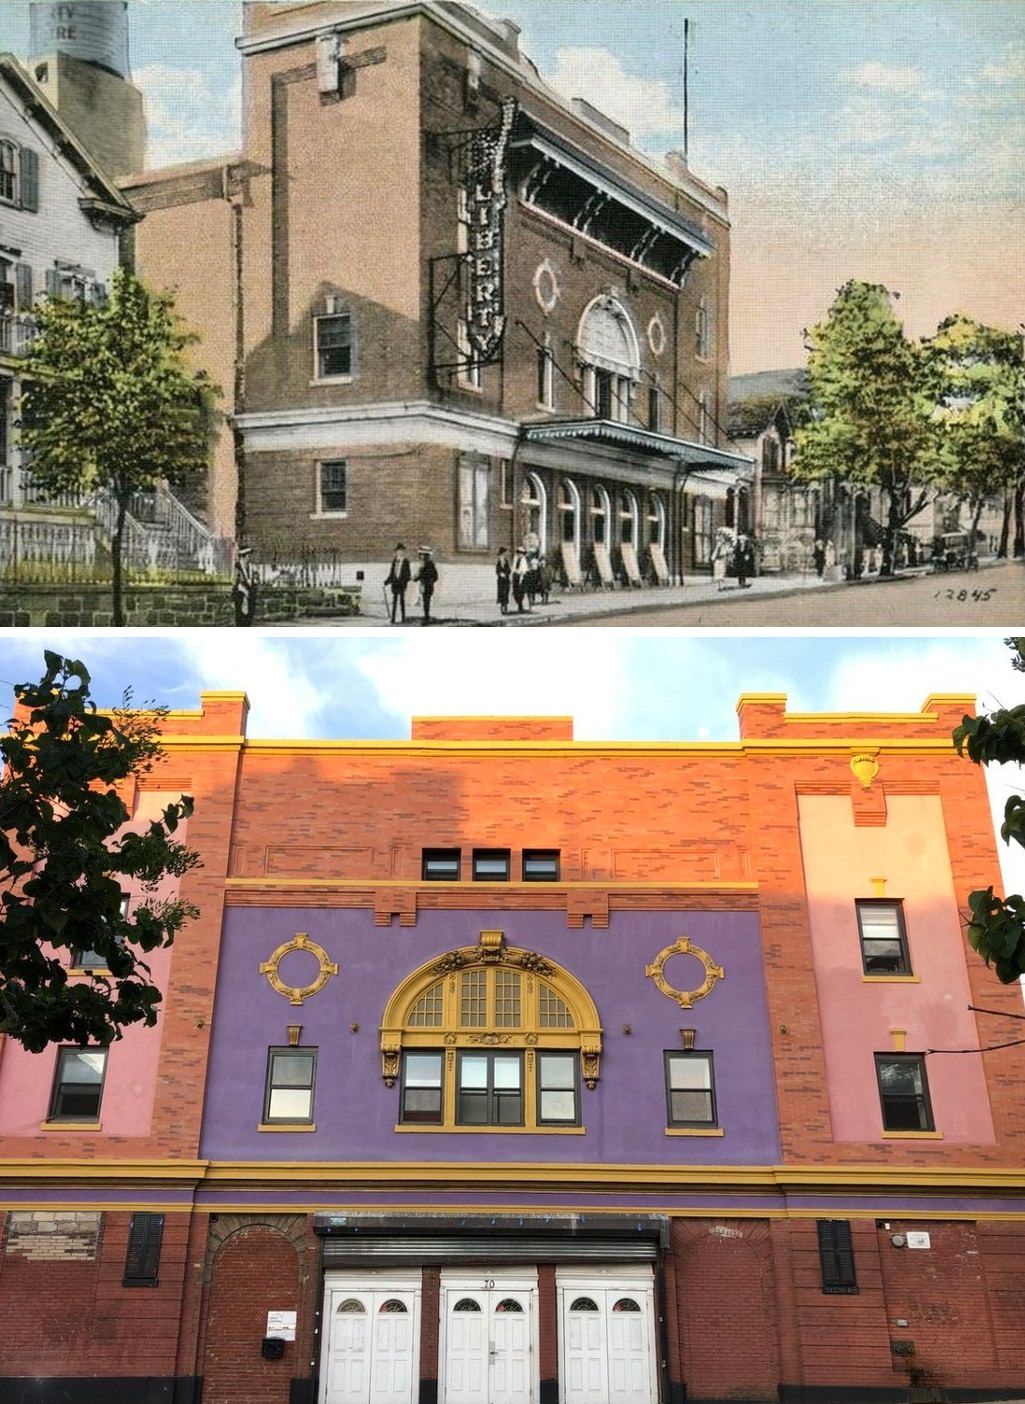 70 Beach Street In Stapleton Was Originally The Liberty Theatre In 1918. Now Houses Various Businesses.